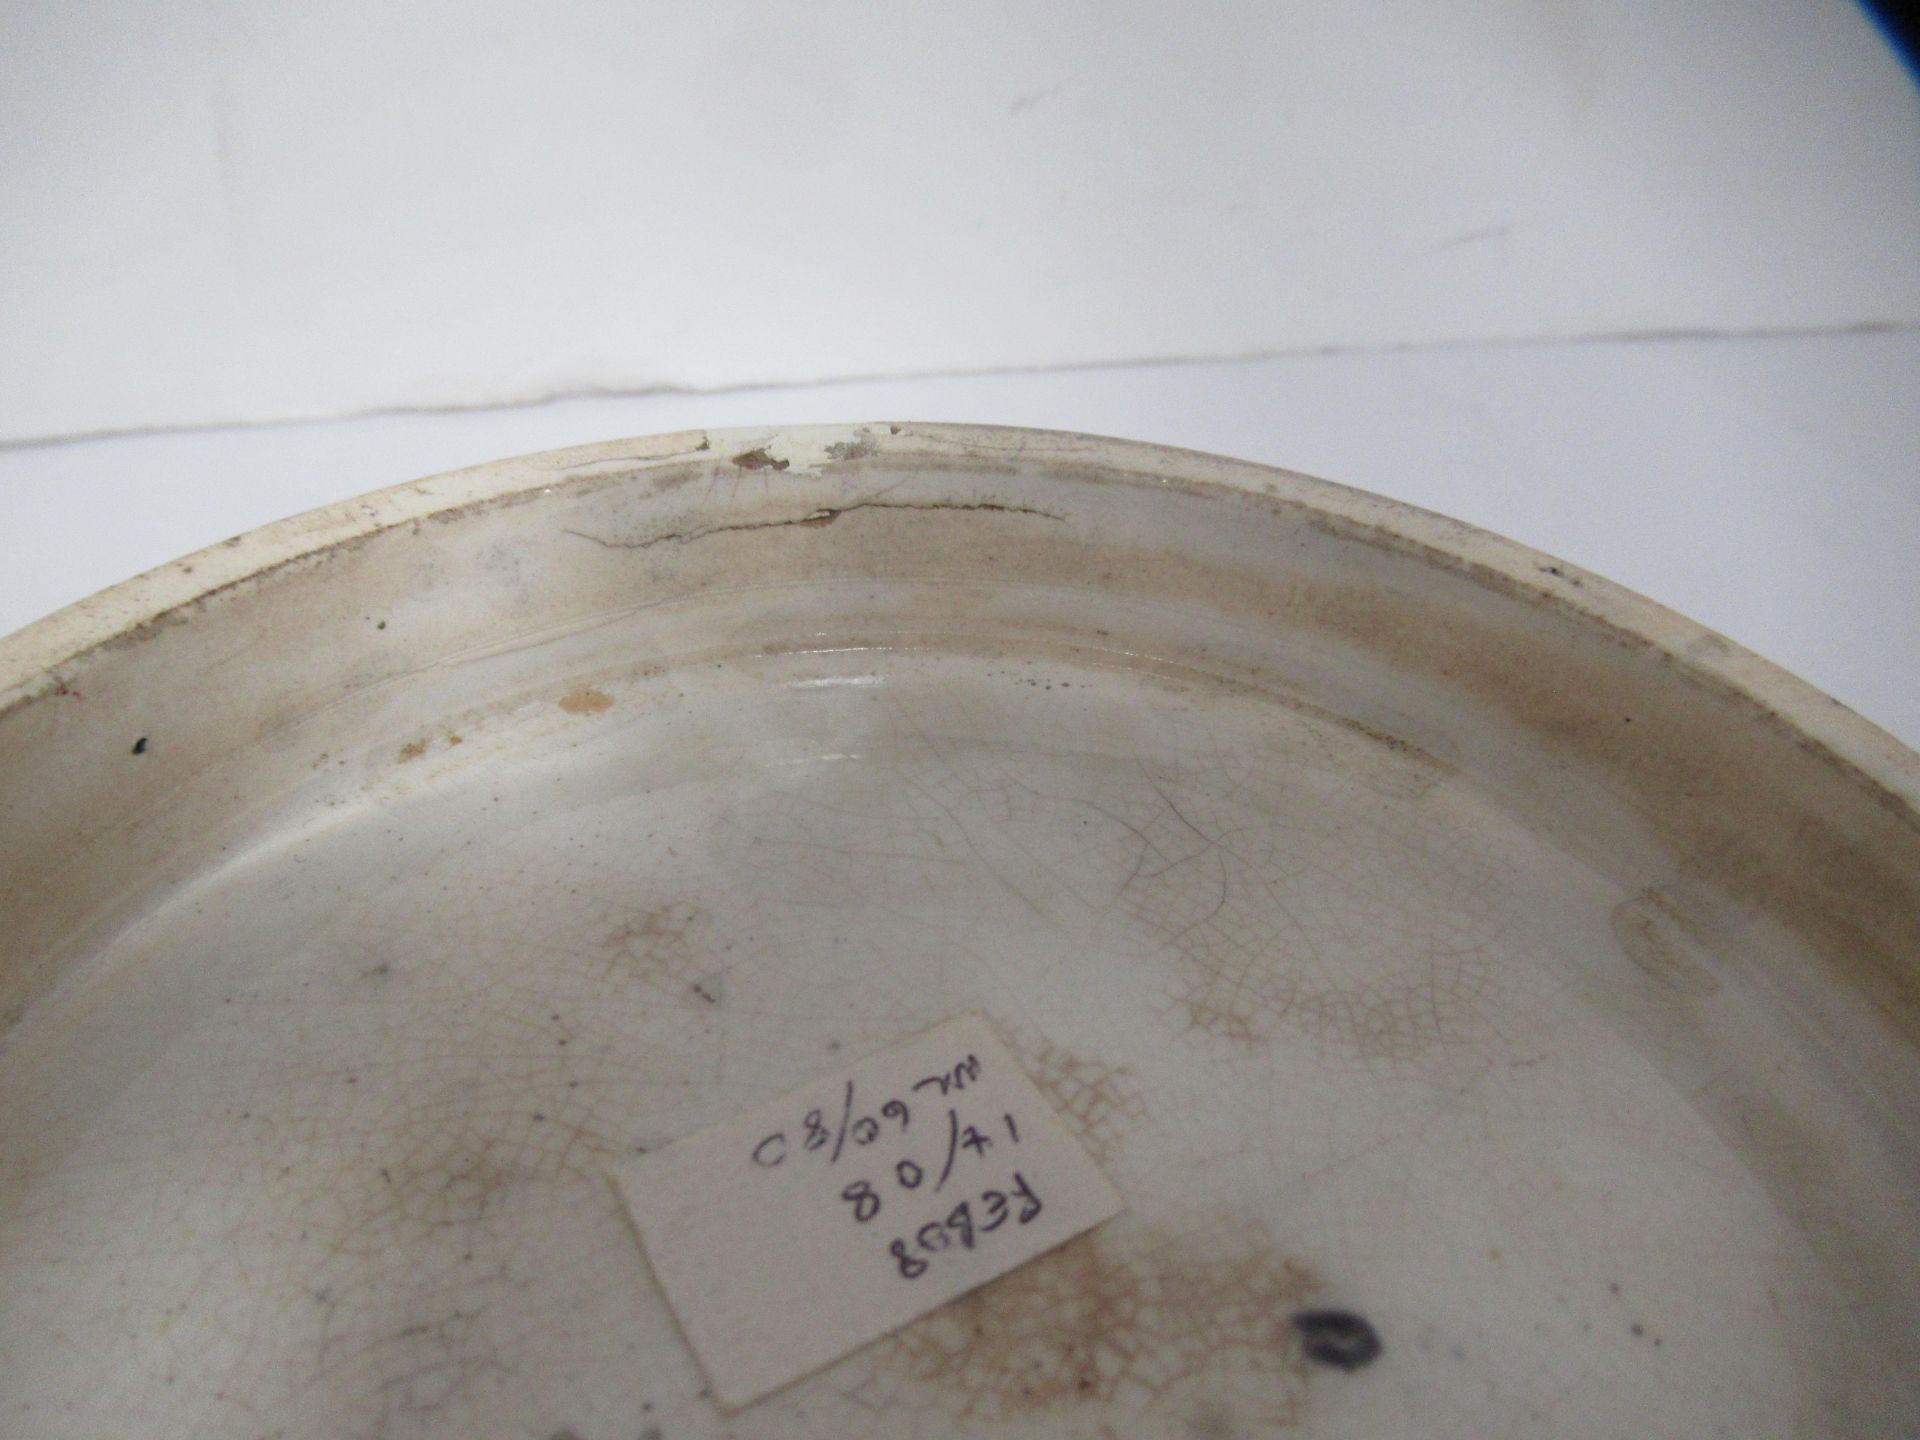 6x Prattware ceramic lids including 'Charing Cross', 'The Game Bag', 'Chapel Royal Savoy Destroyed b - Image 24 of 27